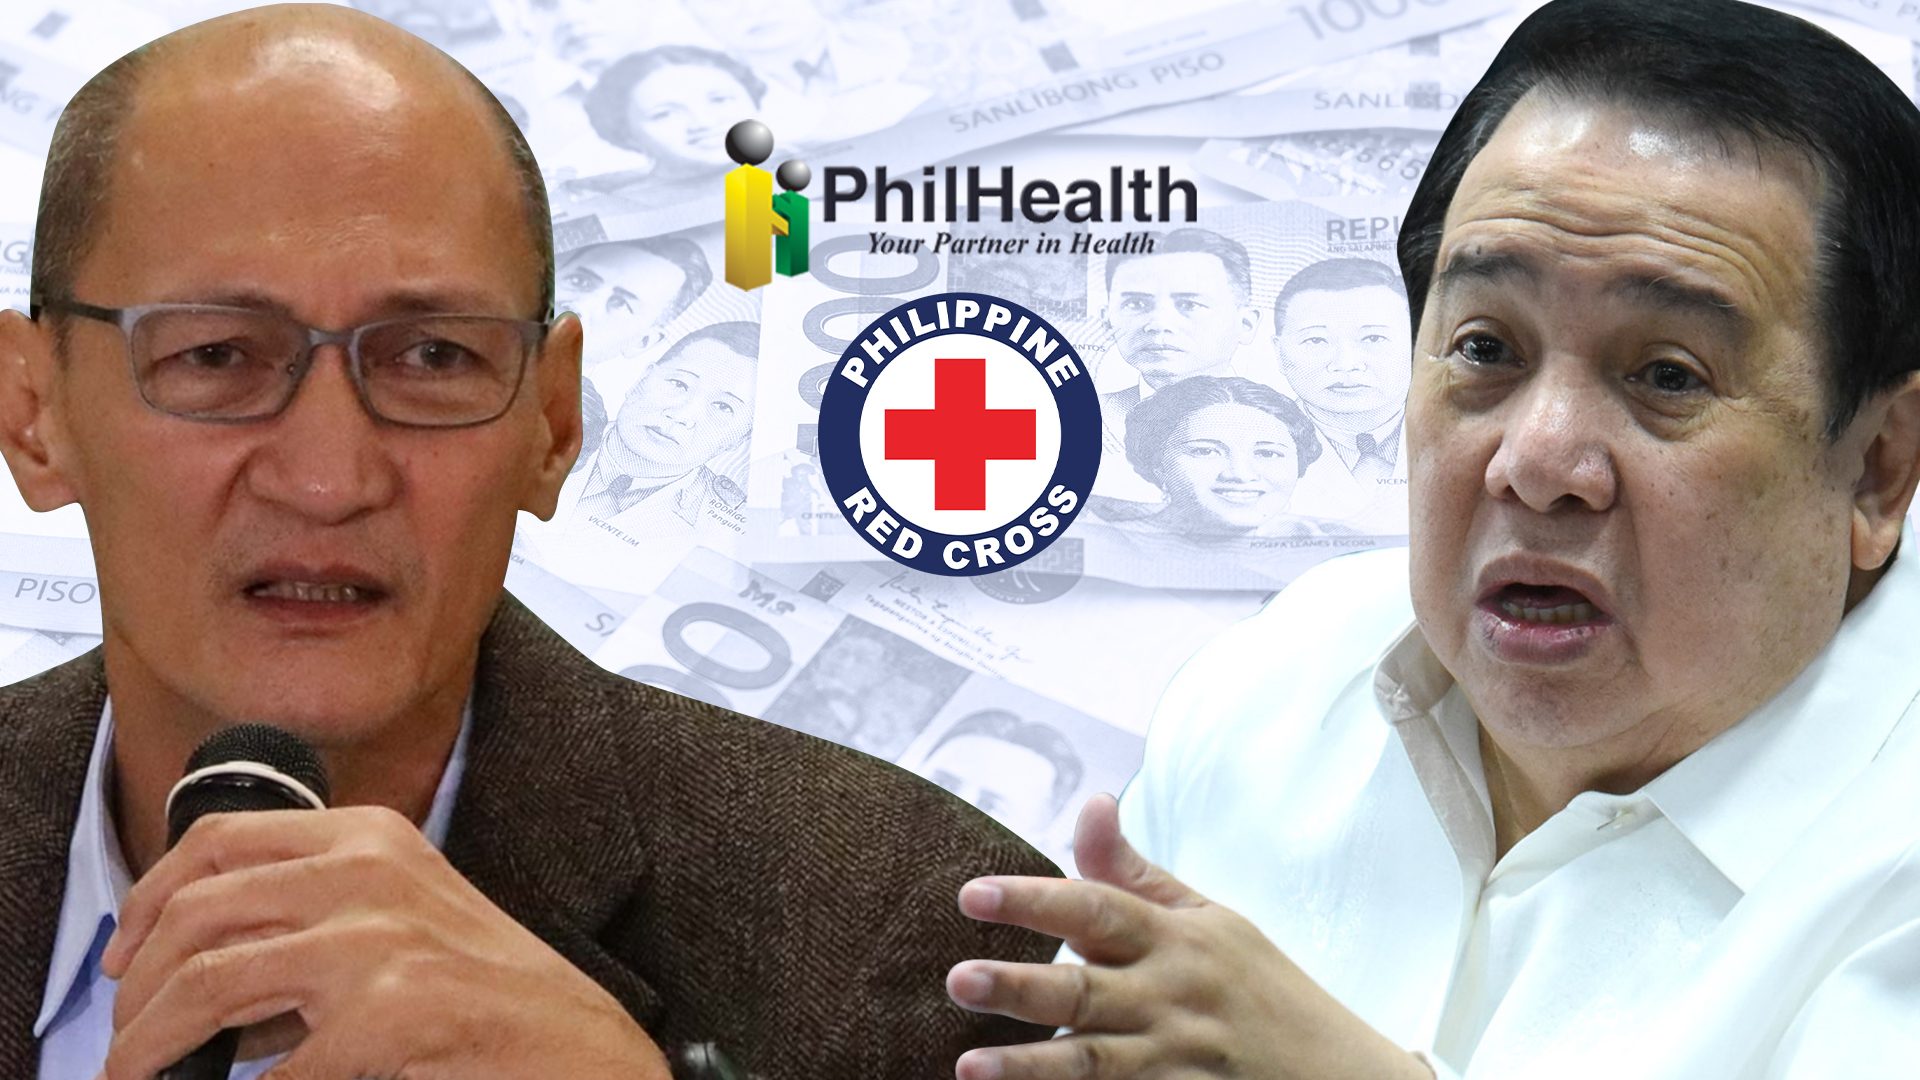 Did Gordon’s P100M Red Cross deal with PhilHealth violate laws?